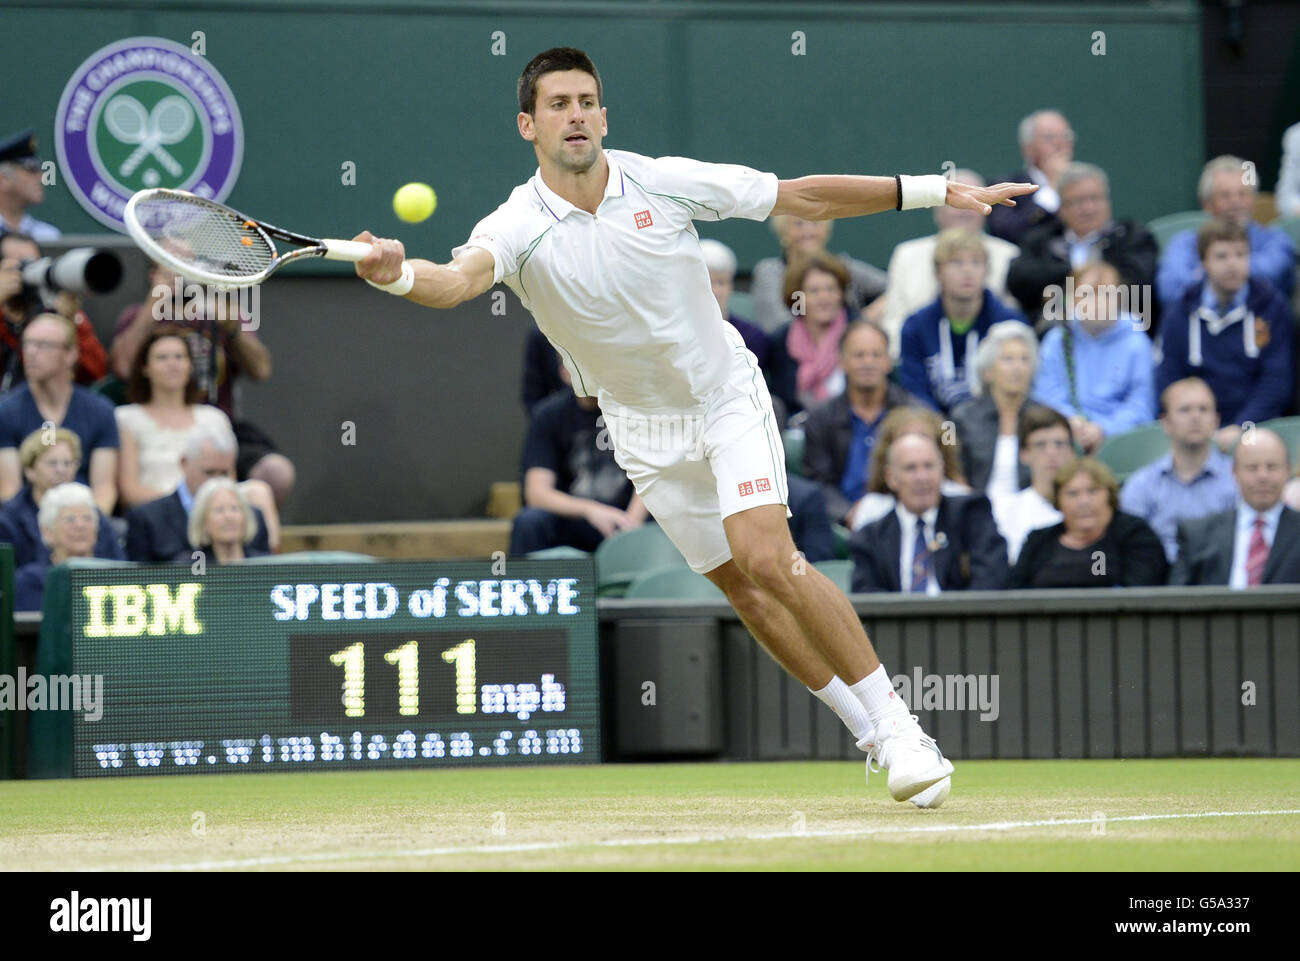 Serbia's Novak Djokovic in action against Switzerland's Roger Federer in the Royal Box during day eleven of the 2012 Wimbledon Championships at the All England Lawn Tennis Club, Wimbledon. Stock Photo